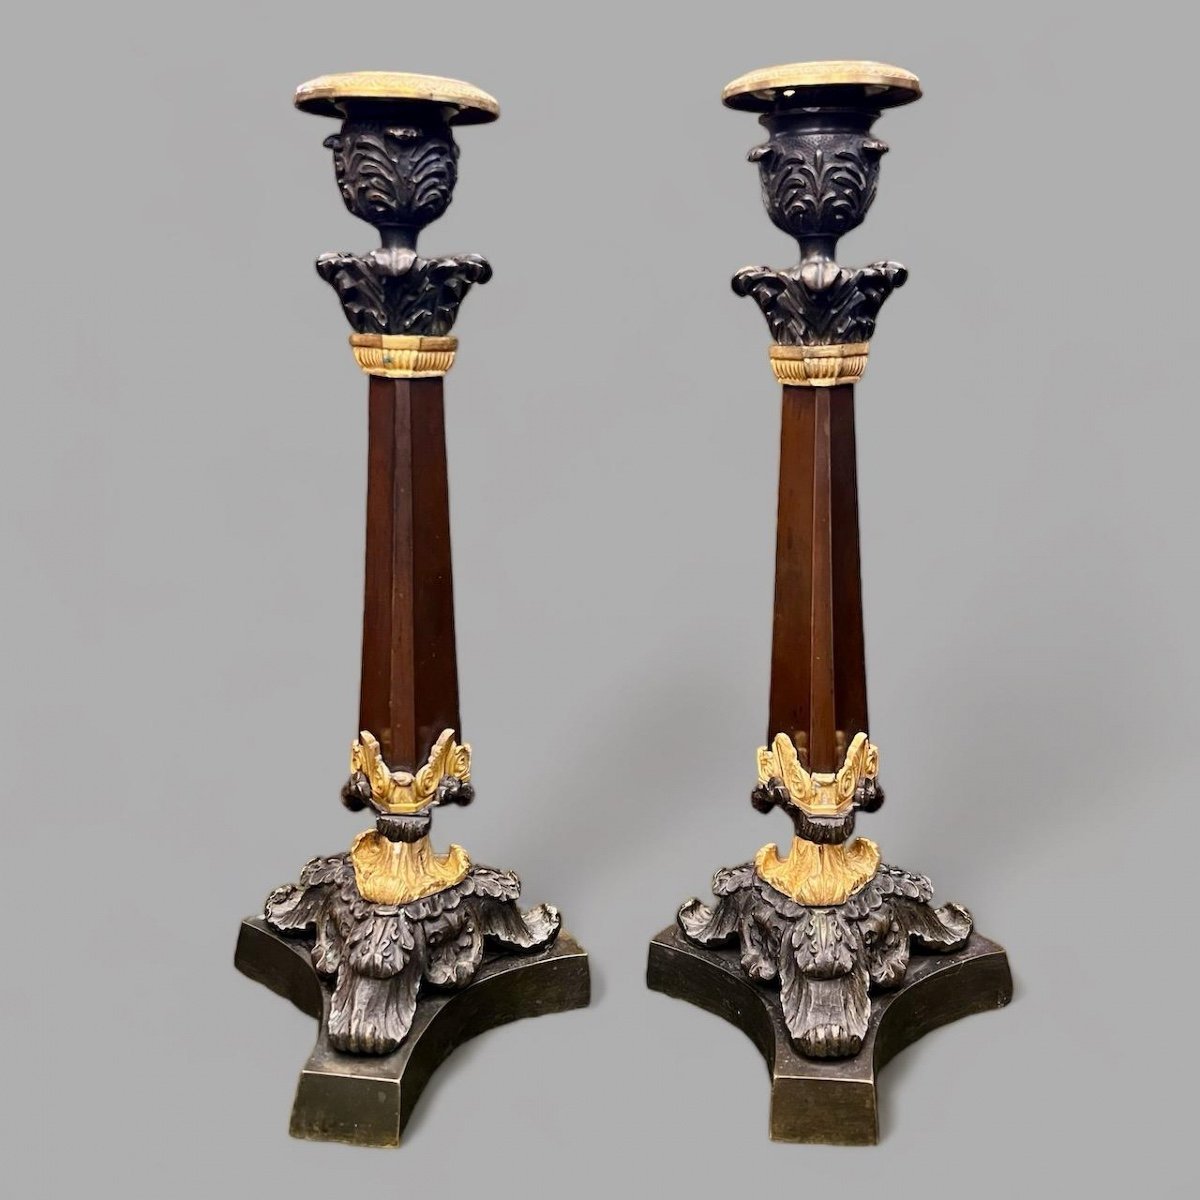 Pair Of Double Patina Bronze Candlesticks From 19th Century Restoration Period -photo-4